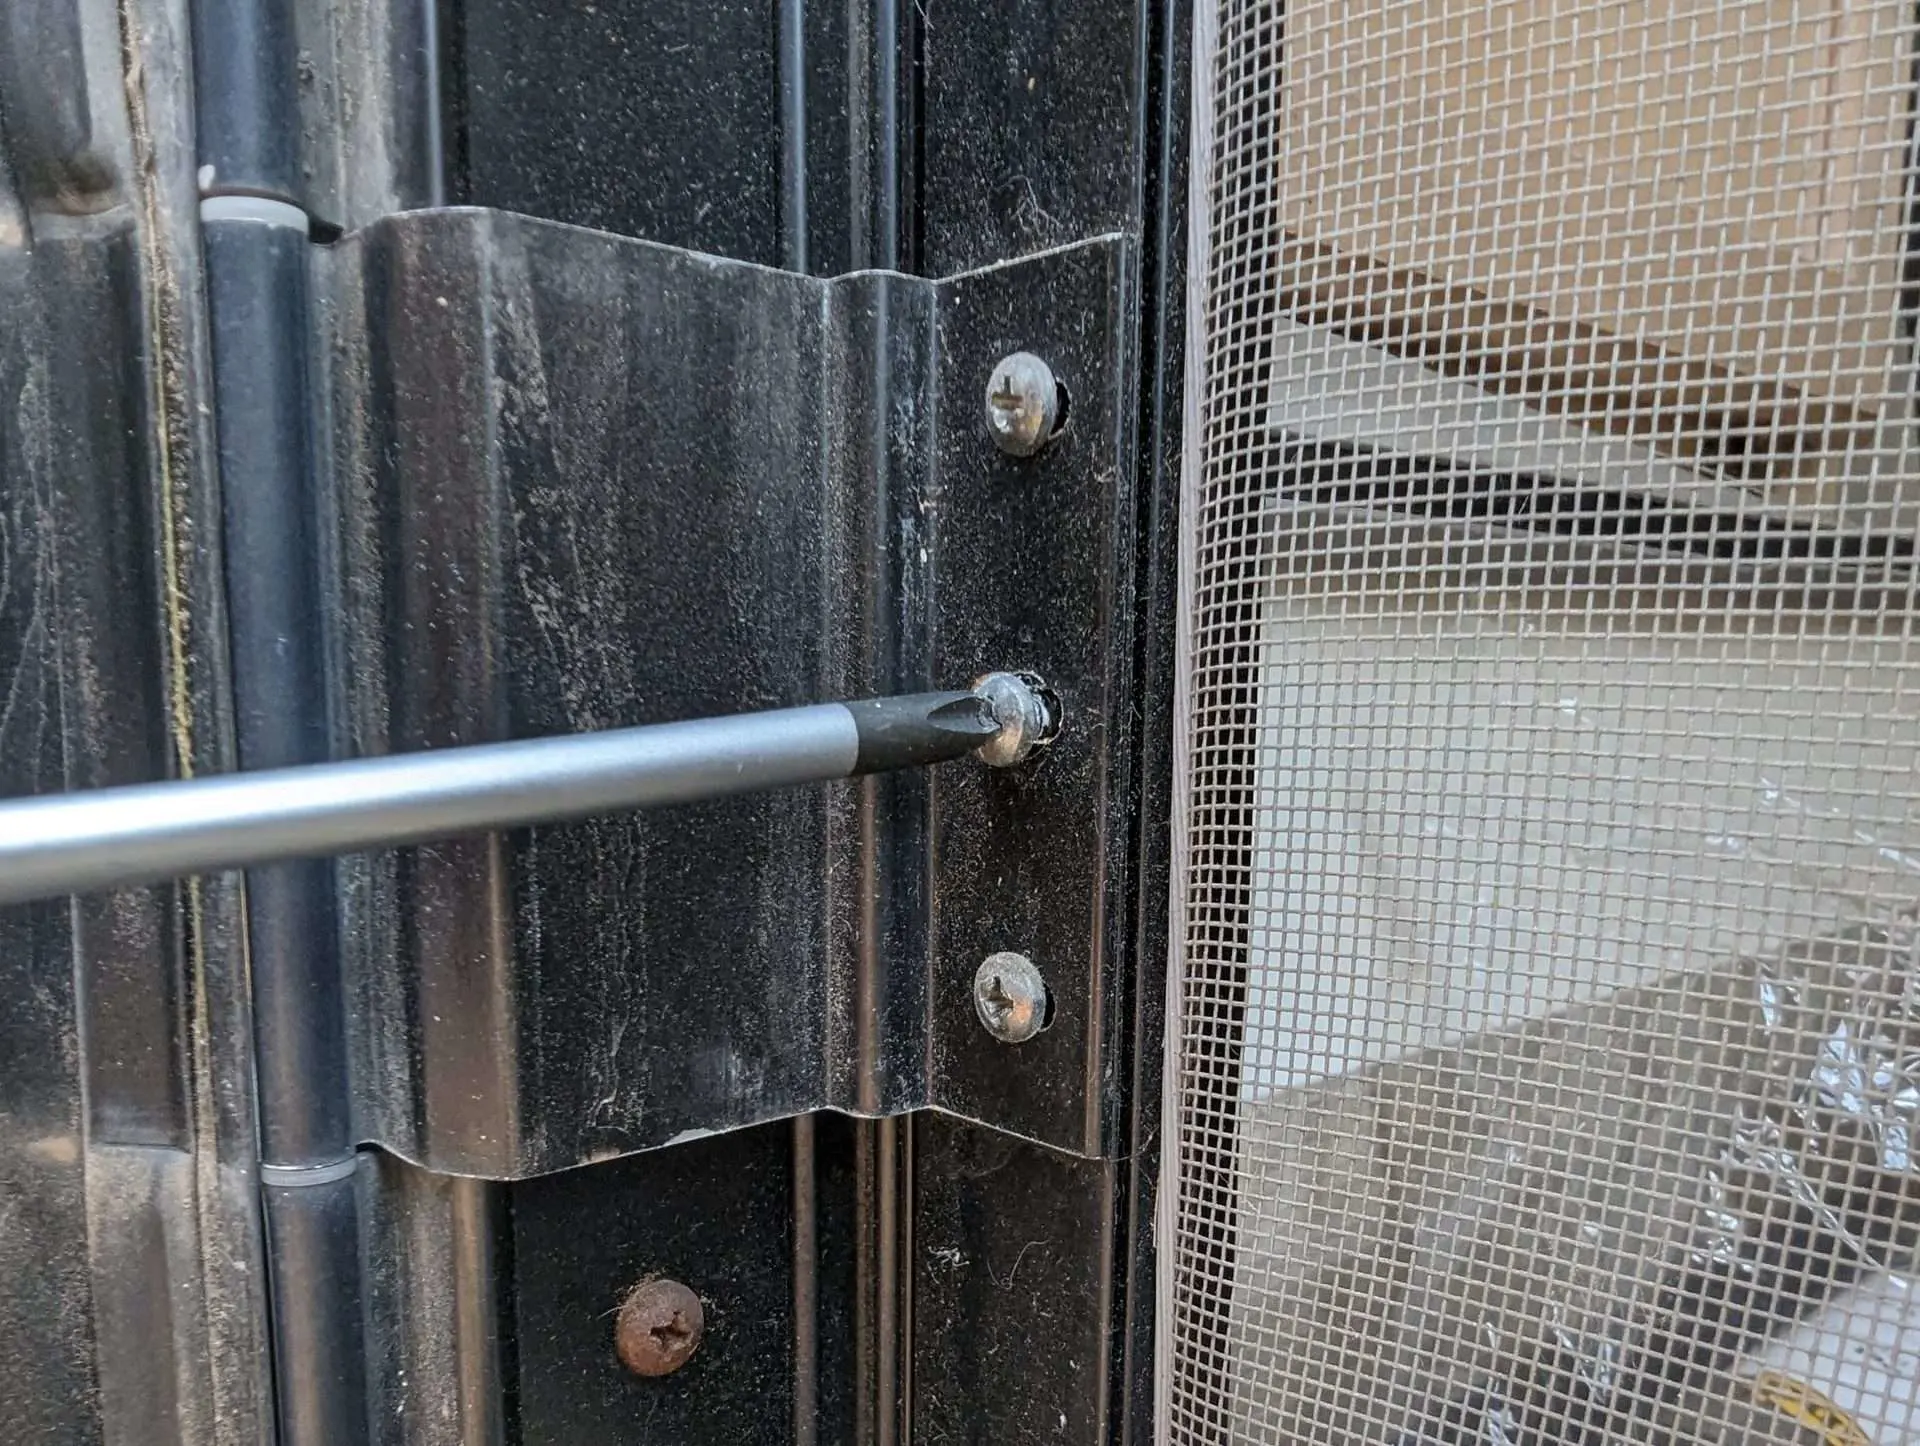 unscrewing an RV screen door to replace it